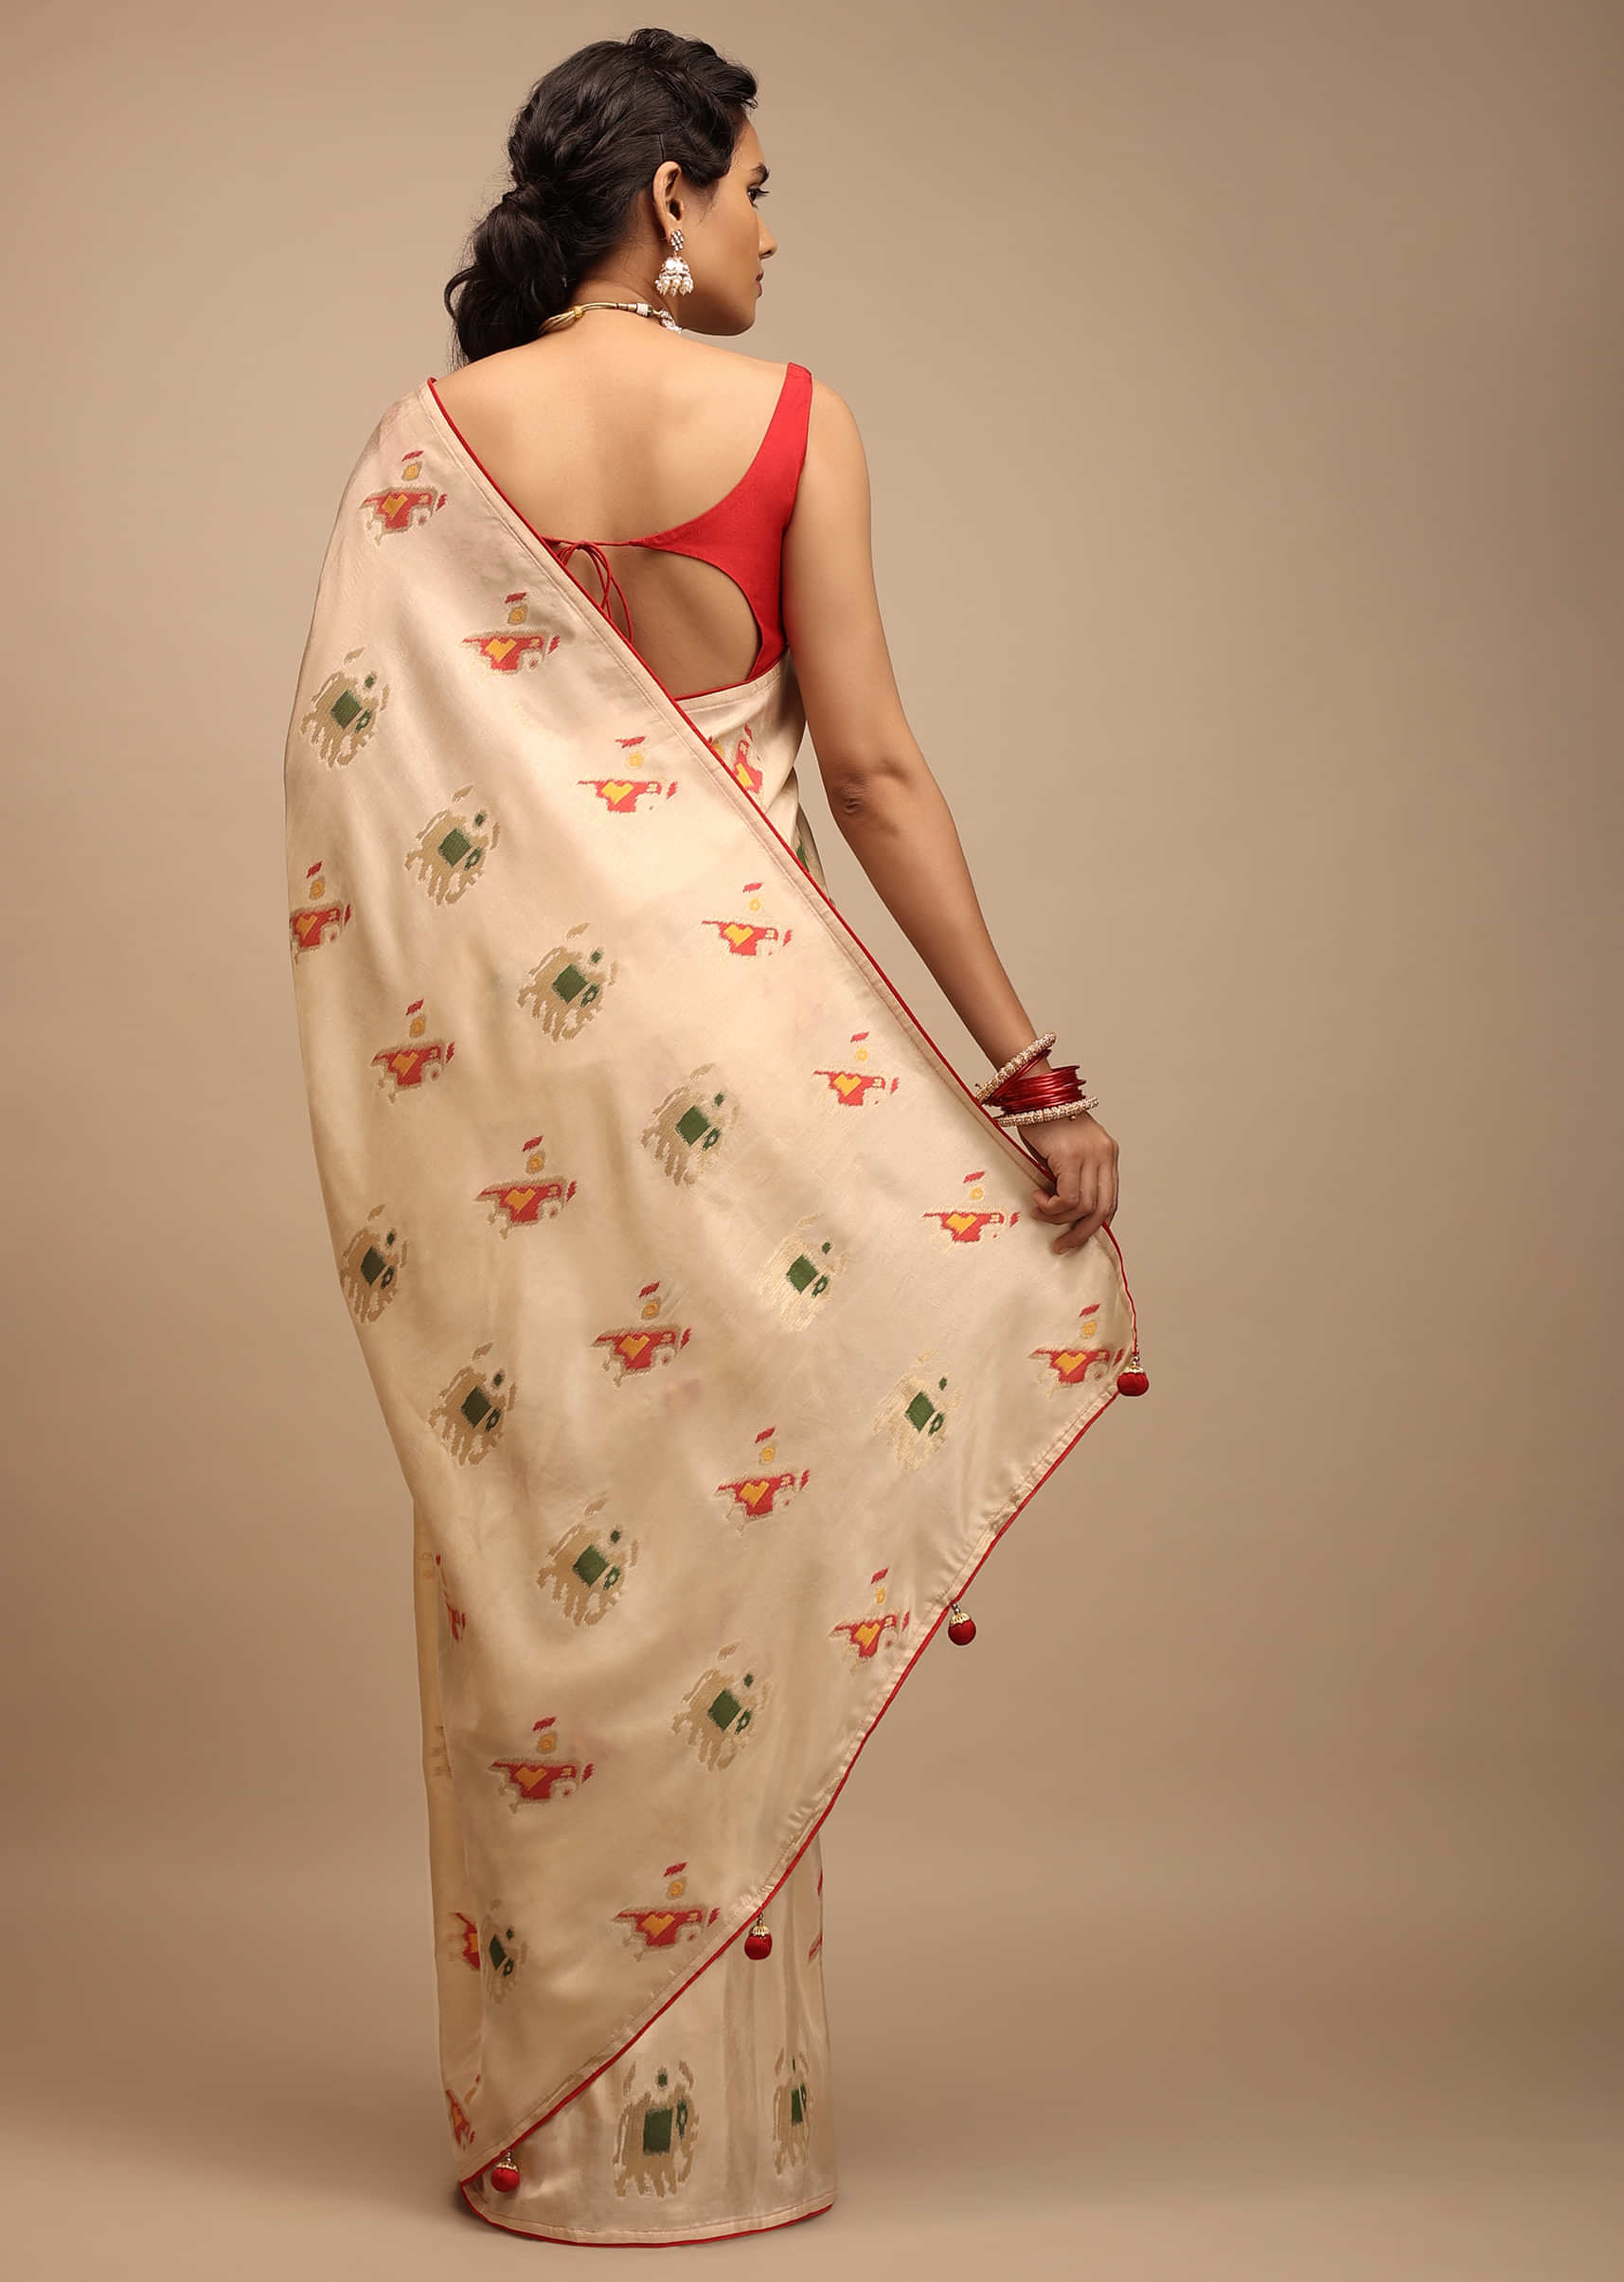 Off White Saree In Dola Silk With Woven Patola Buttis And Red Unstitched Blouse